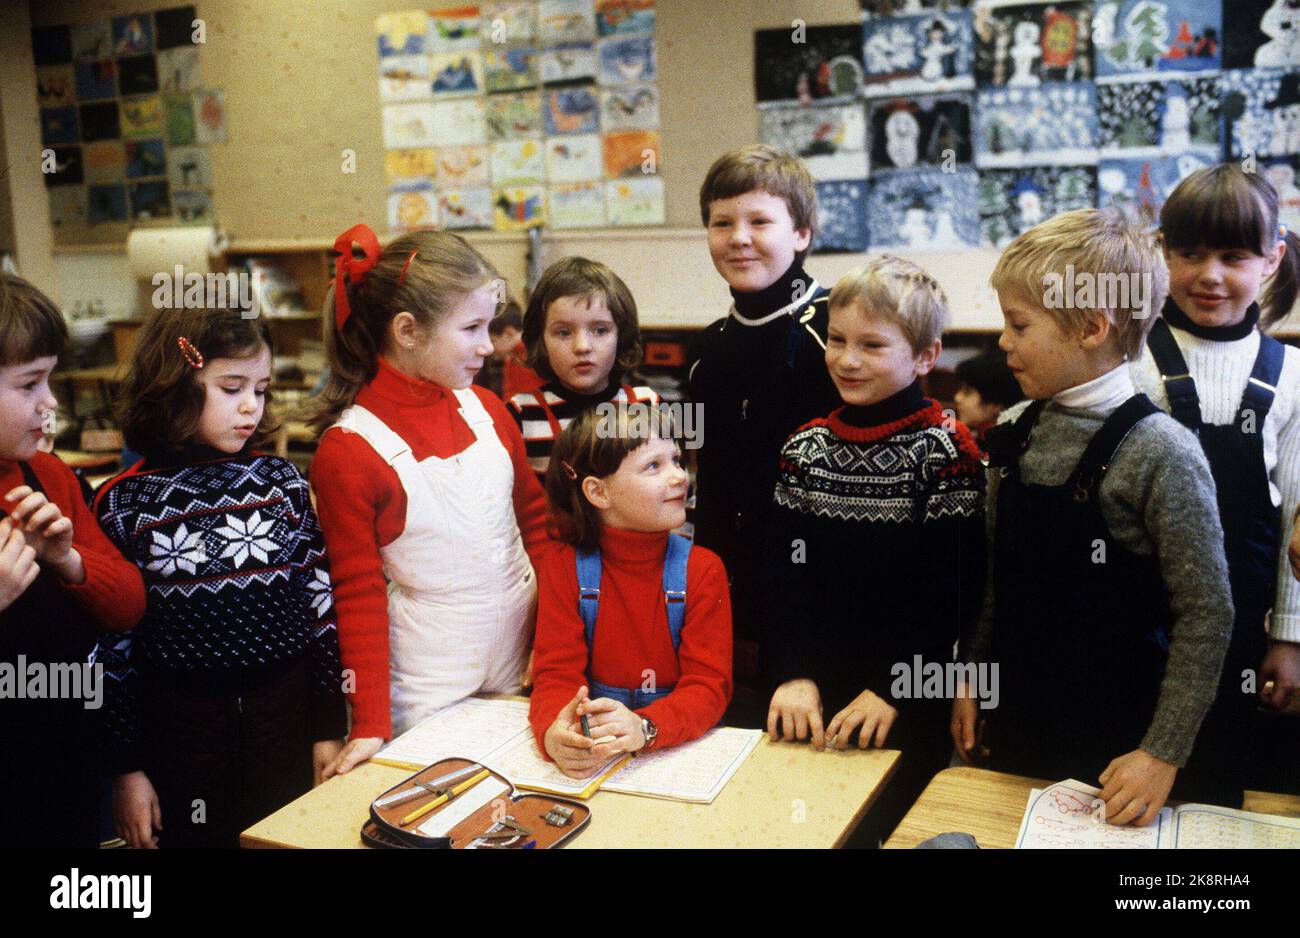 Oslo. Princess Märtha Louise at the school in 1st grade at Smestad elementary school. The picture: The Princess (middle) along with her classmates in the classroom. NTB Stock Photo: Erik Thorberg / NTB Stock Photo